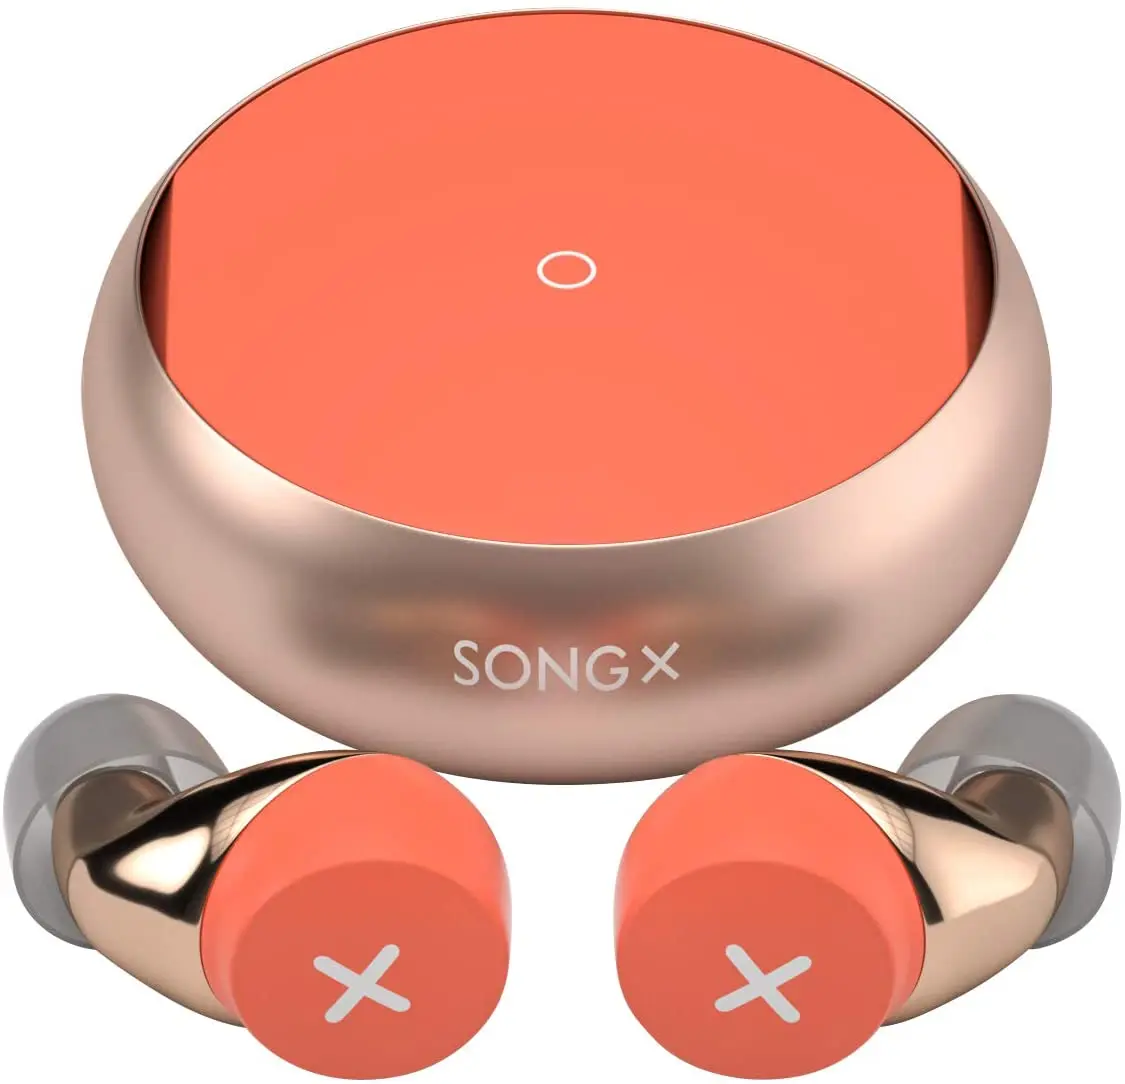 

SONGX 06 True Wireless Earbuds TWS headphone with G-Sensor Touch Control IPX5 waterproof stereo 25H play time SONGX TWS